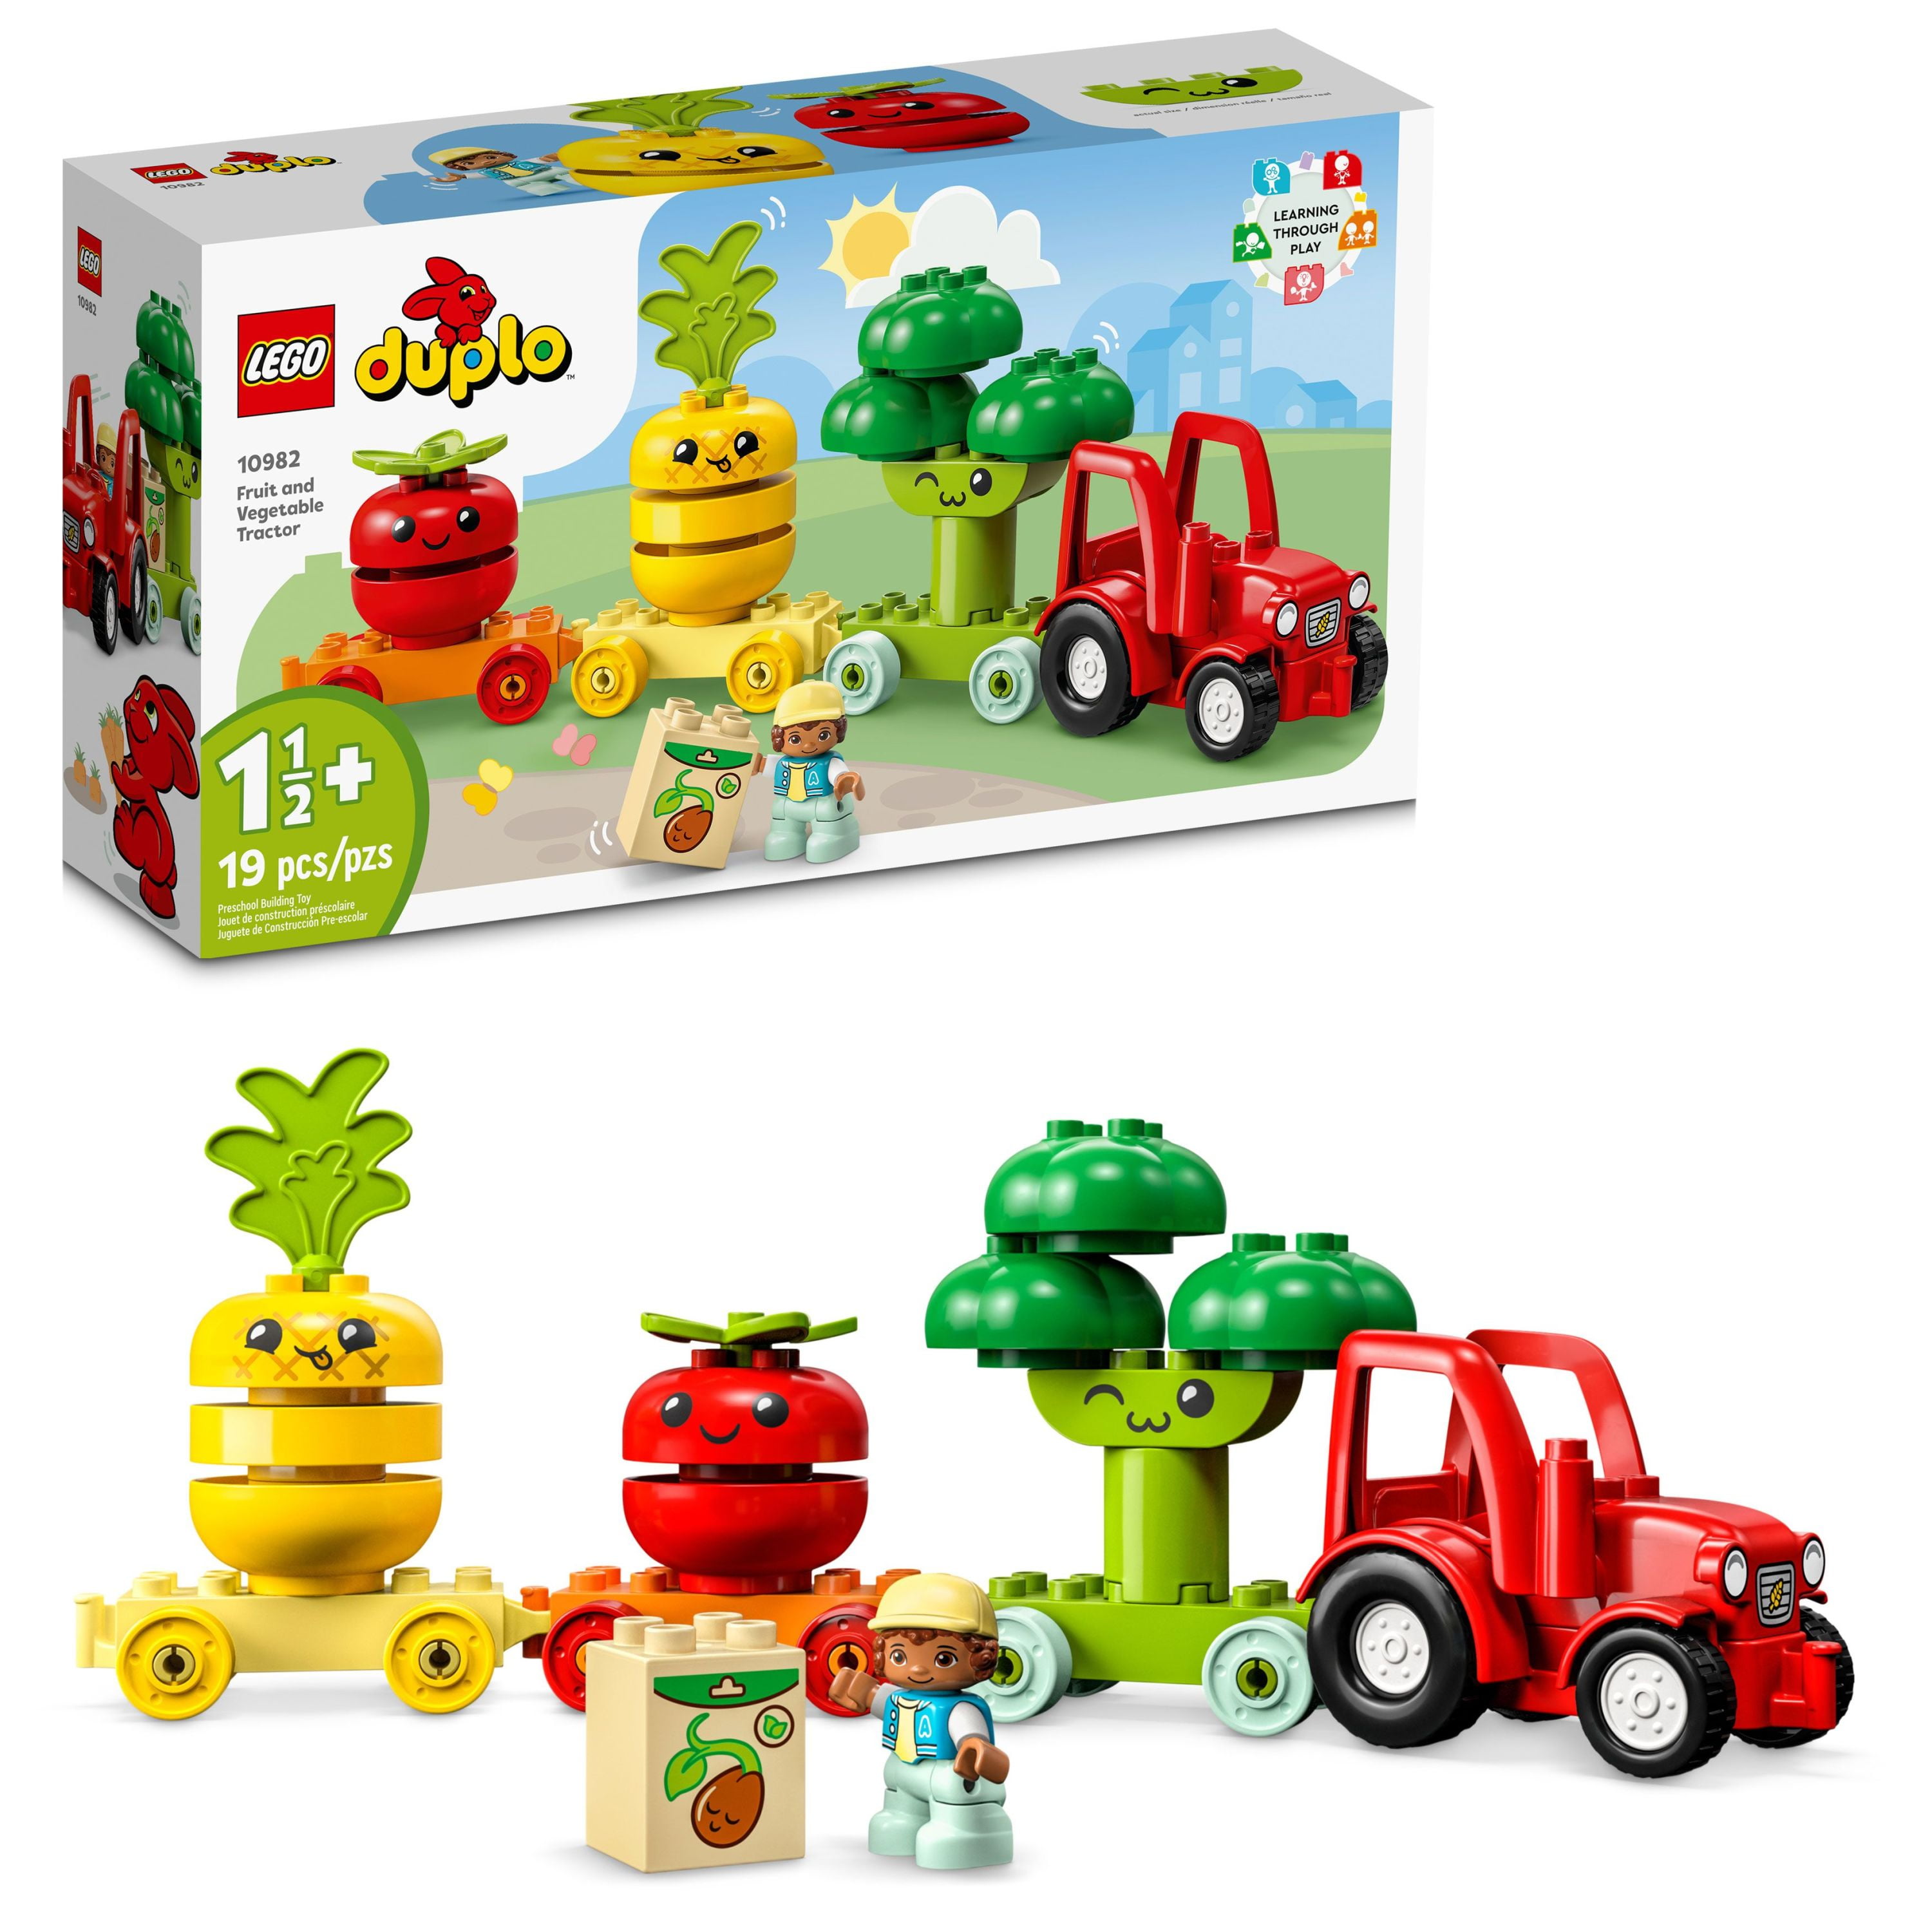 LEGO DUPLO My First Fruit and Vegetable Tractor Toy 10982, Stacking and  Color Sorting Toys for Babies and Toddlers ages 1 .5 - 3 Years Old